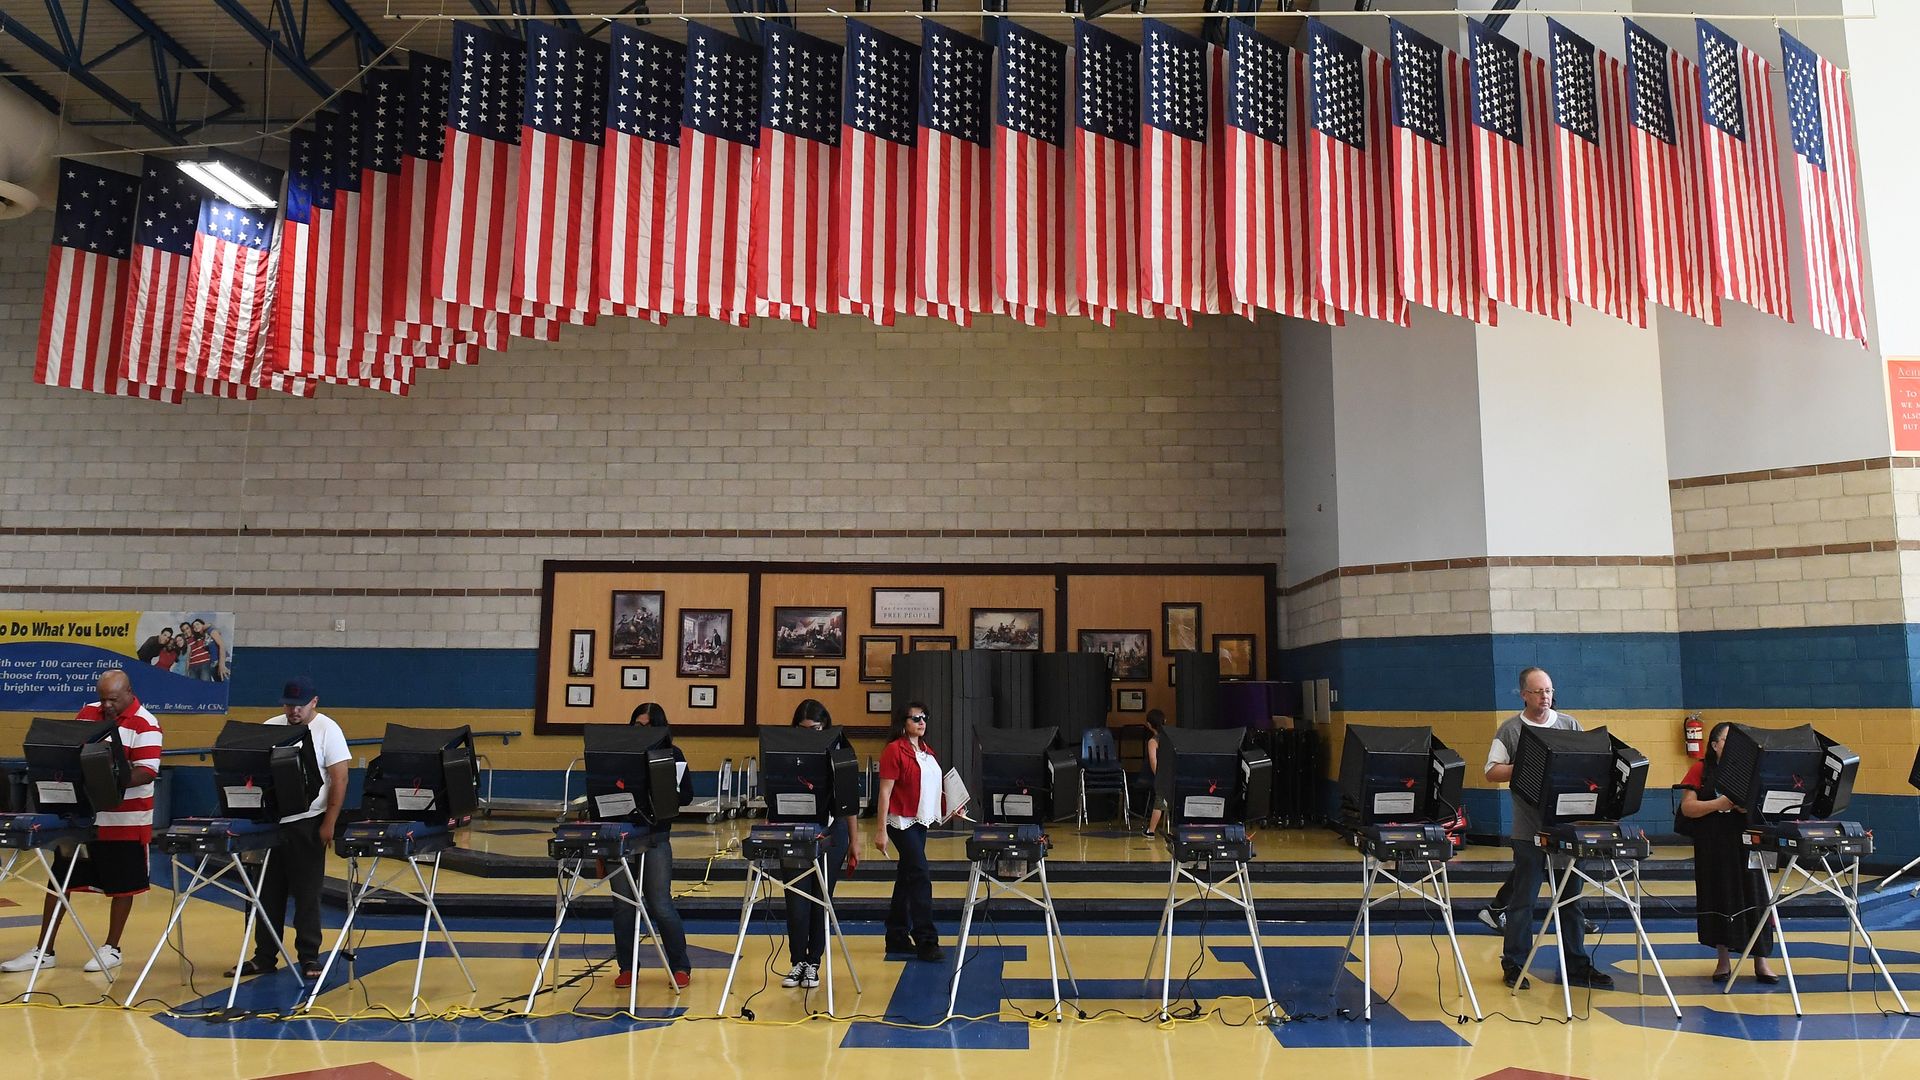 Voters cast their ballots at voting machines at Cheyenne High School on Election Day on November 8, 2016 in North Las Vegas, Nevada. 